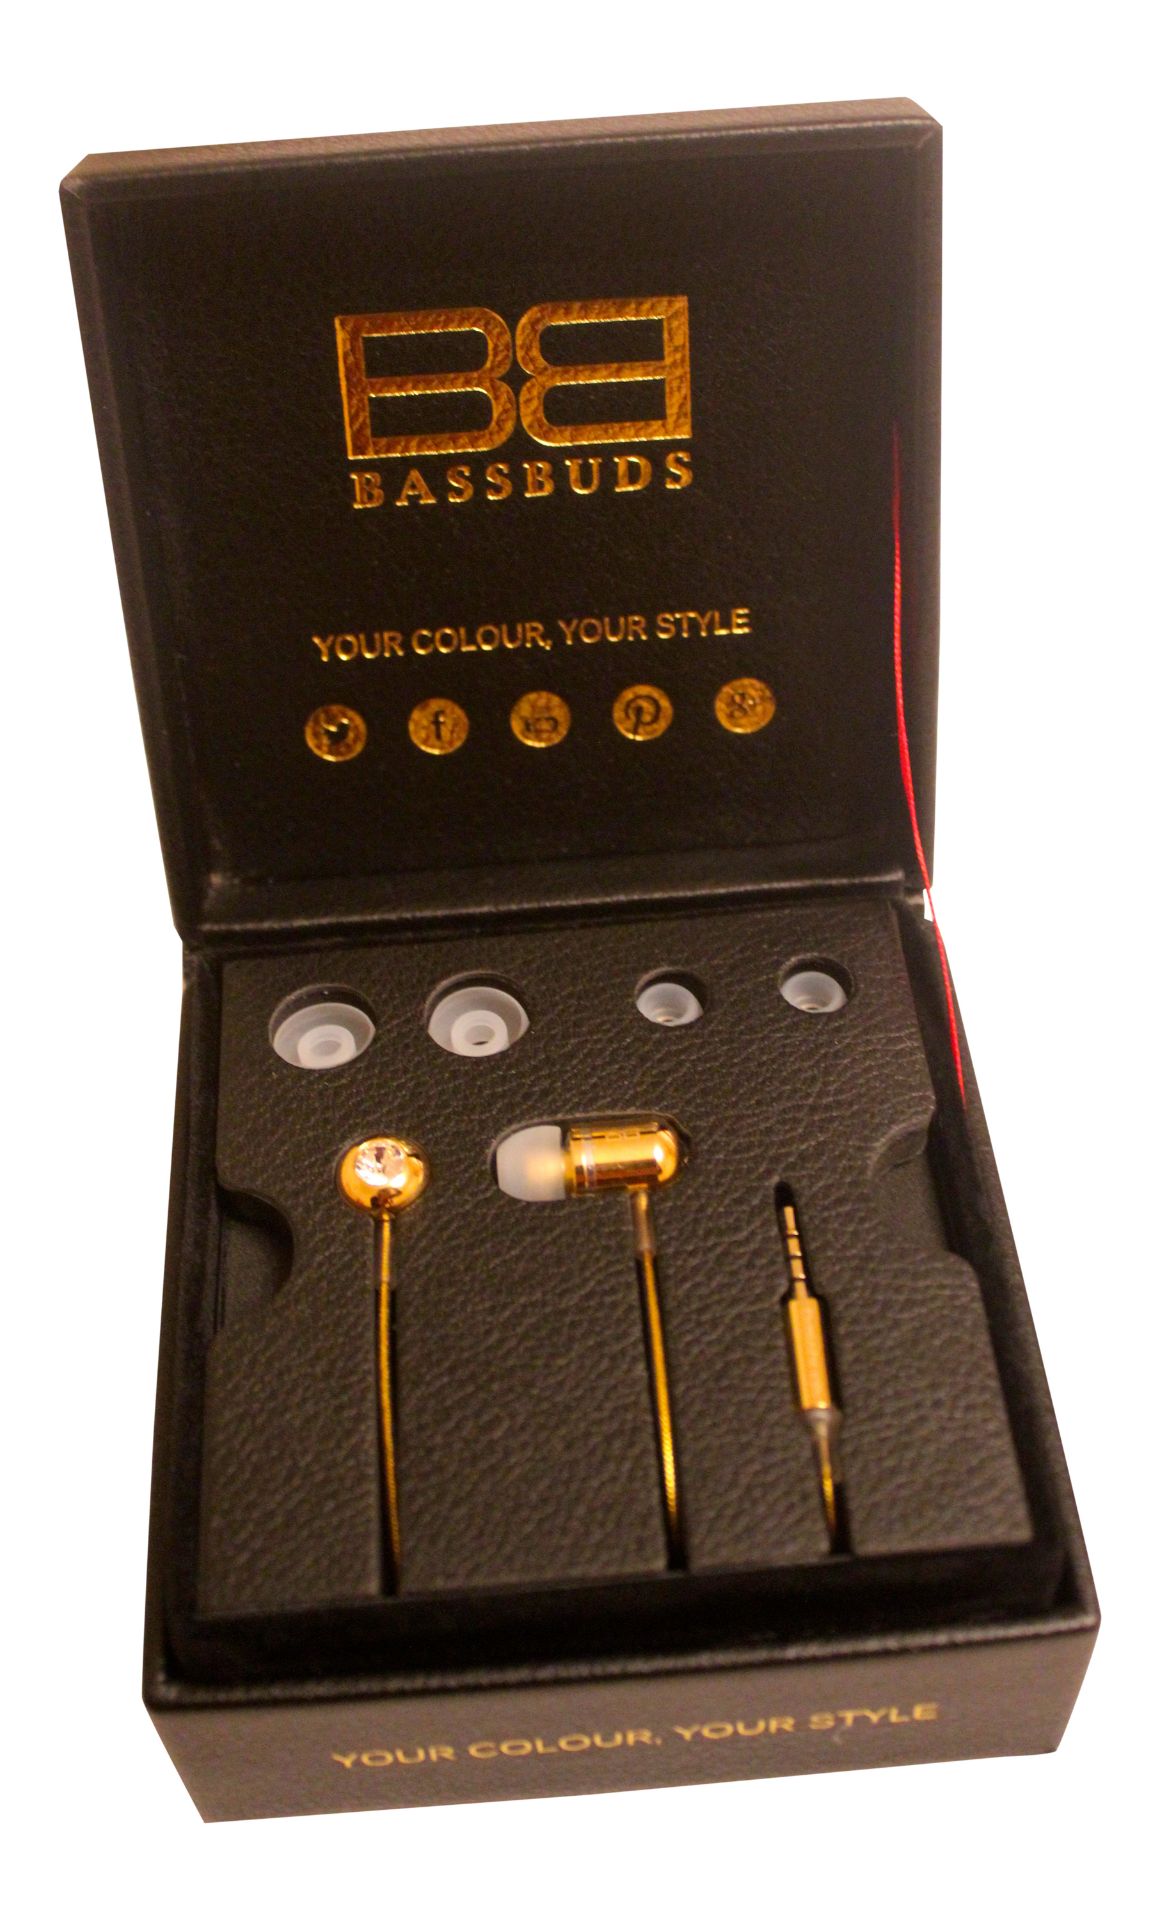 24ct Gold Plated BassBuds with Swarovski Crystal In-Ear Earphones x 1 Unit - Image 3 of 5